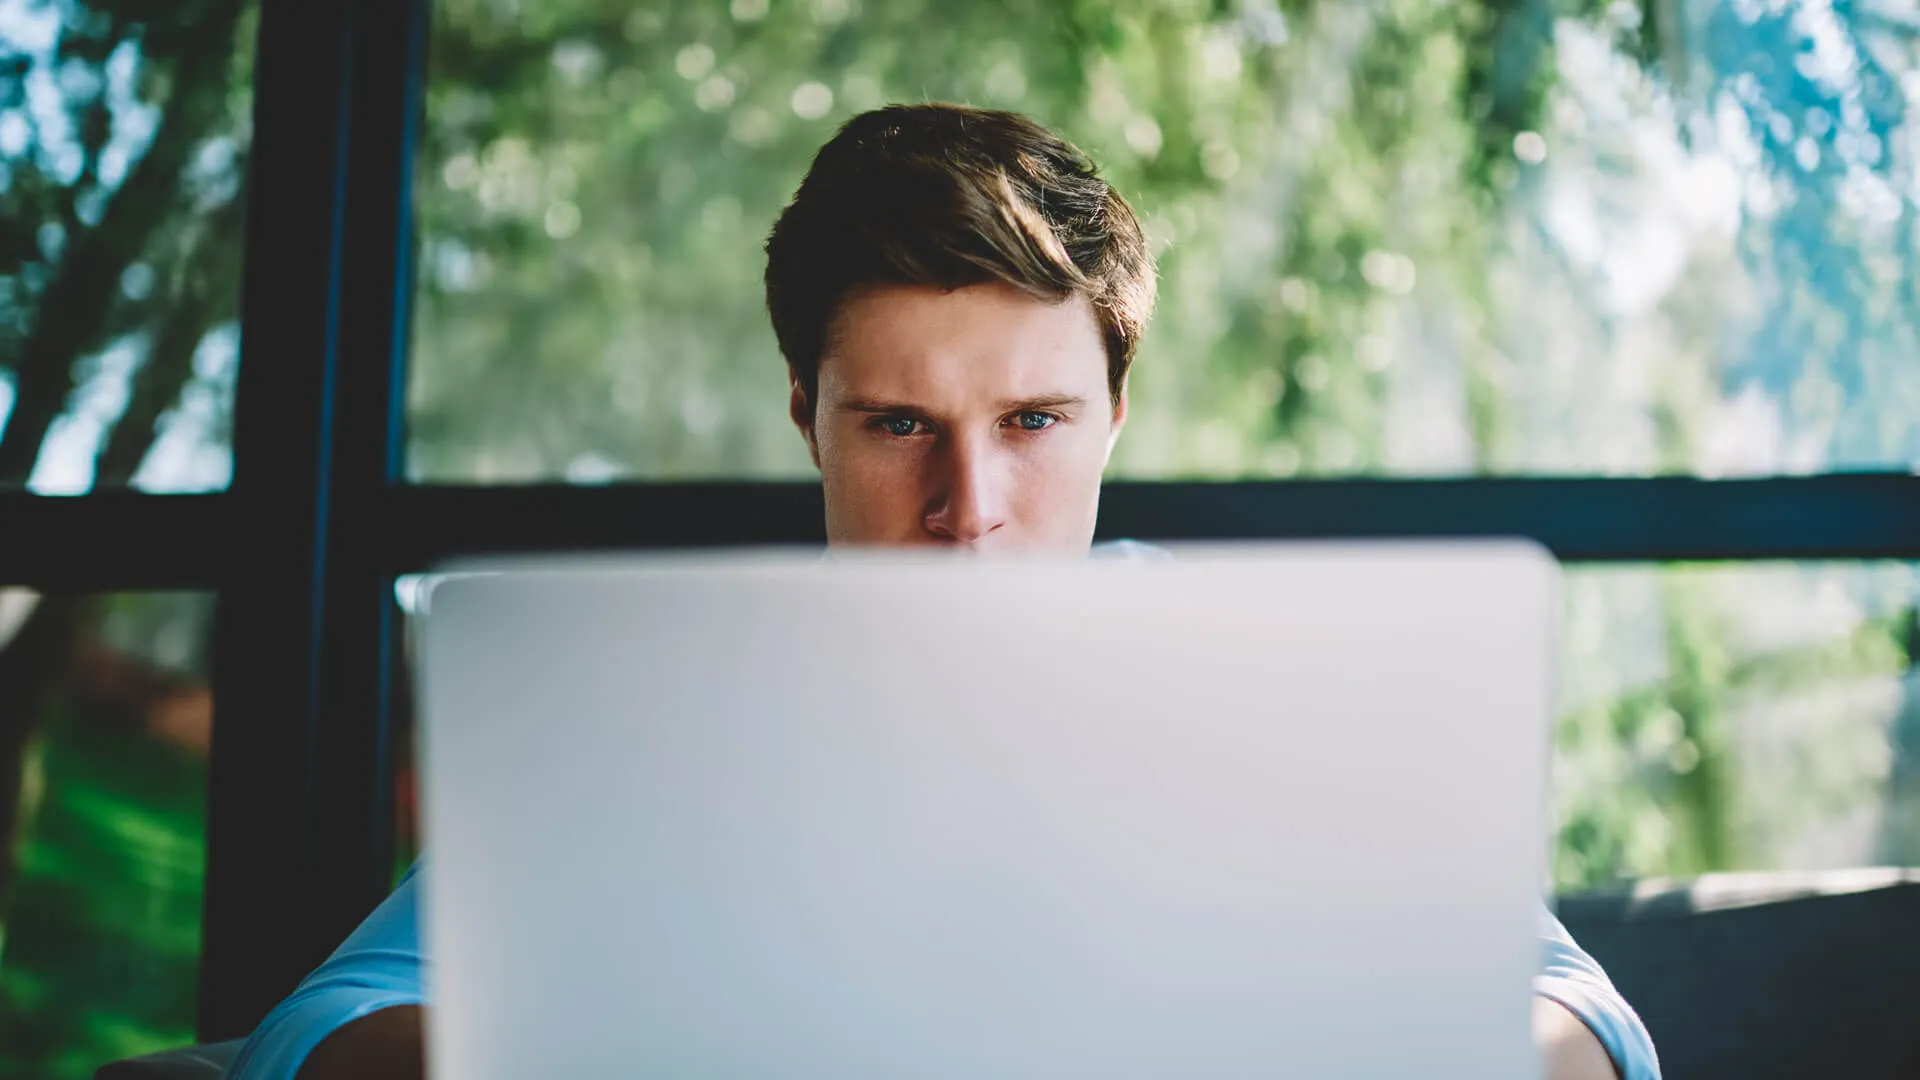 Man behind laptop focused on viewing the screen